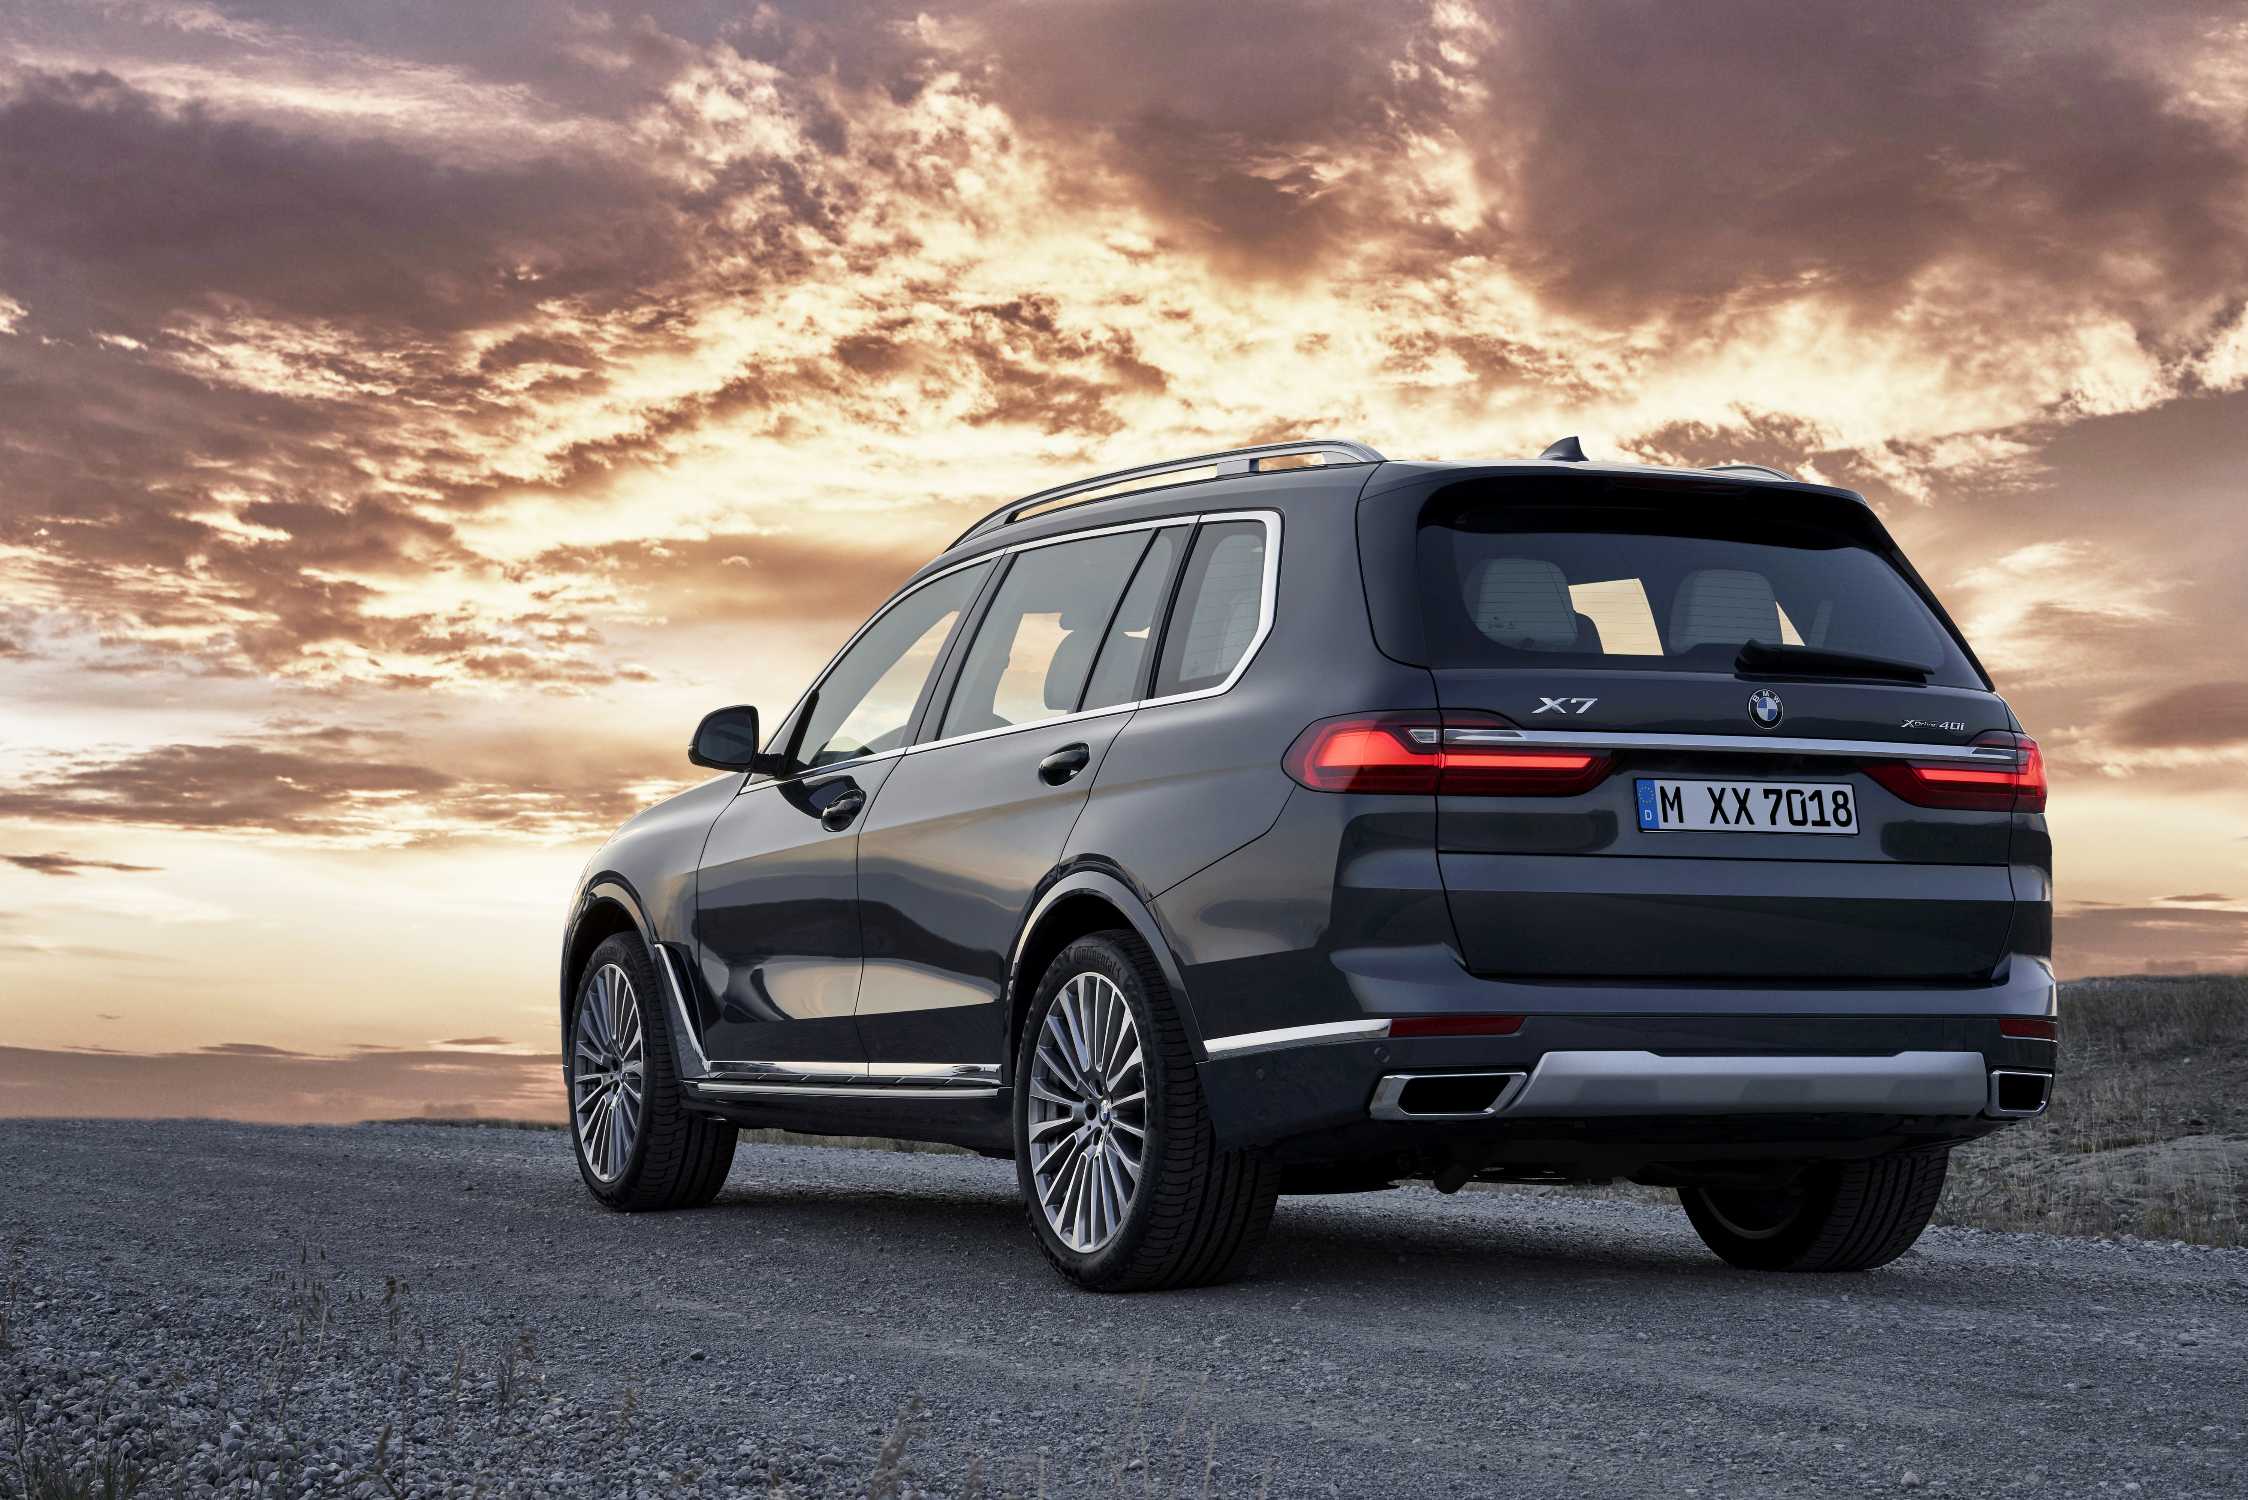 Foreign BMW X7 demanded millions of dollars in compensation for airbag  problems caused by defective cup holder design - iNEWS